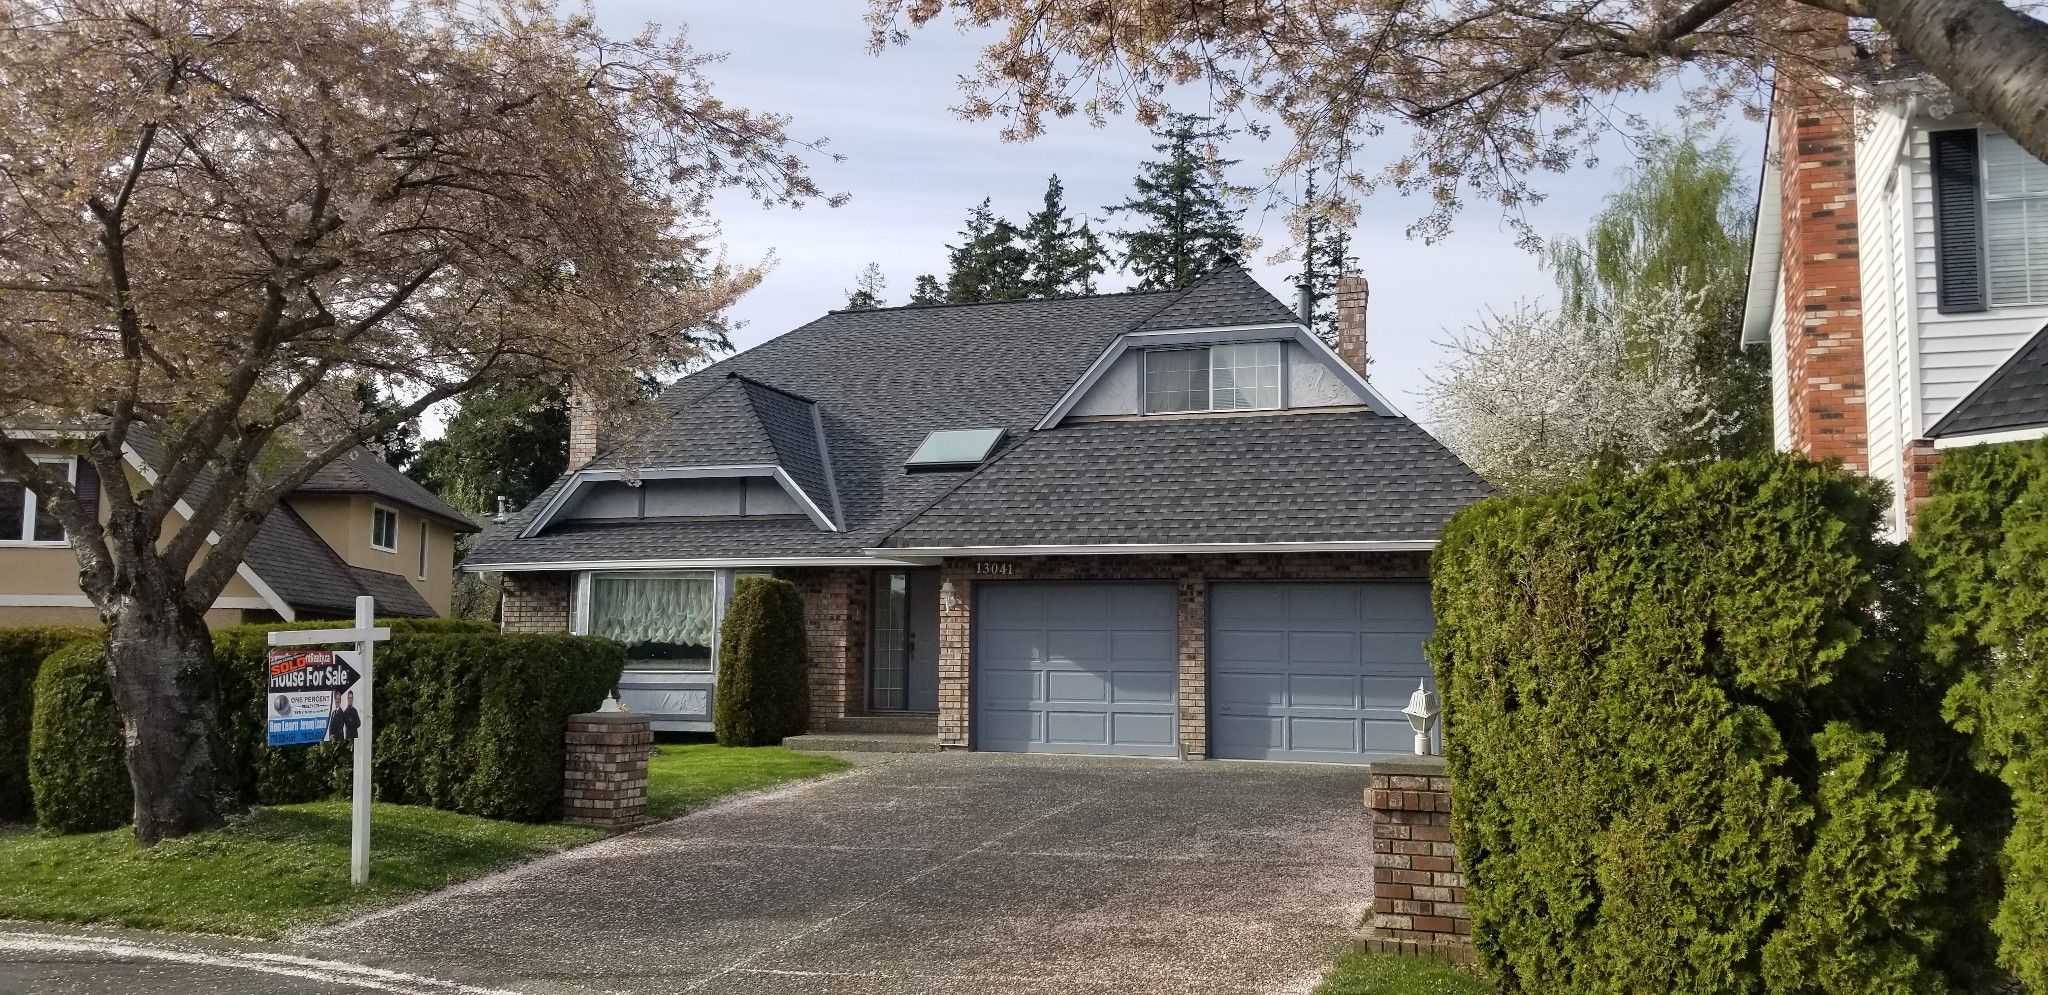 Main Photo: 13041 19a ave in Surrey: Crescent Bch Ocean Pk. House for sale (South Surrey White Rock)  : MLS®# R2346425